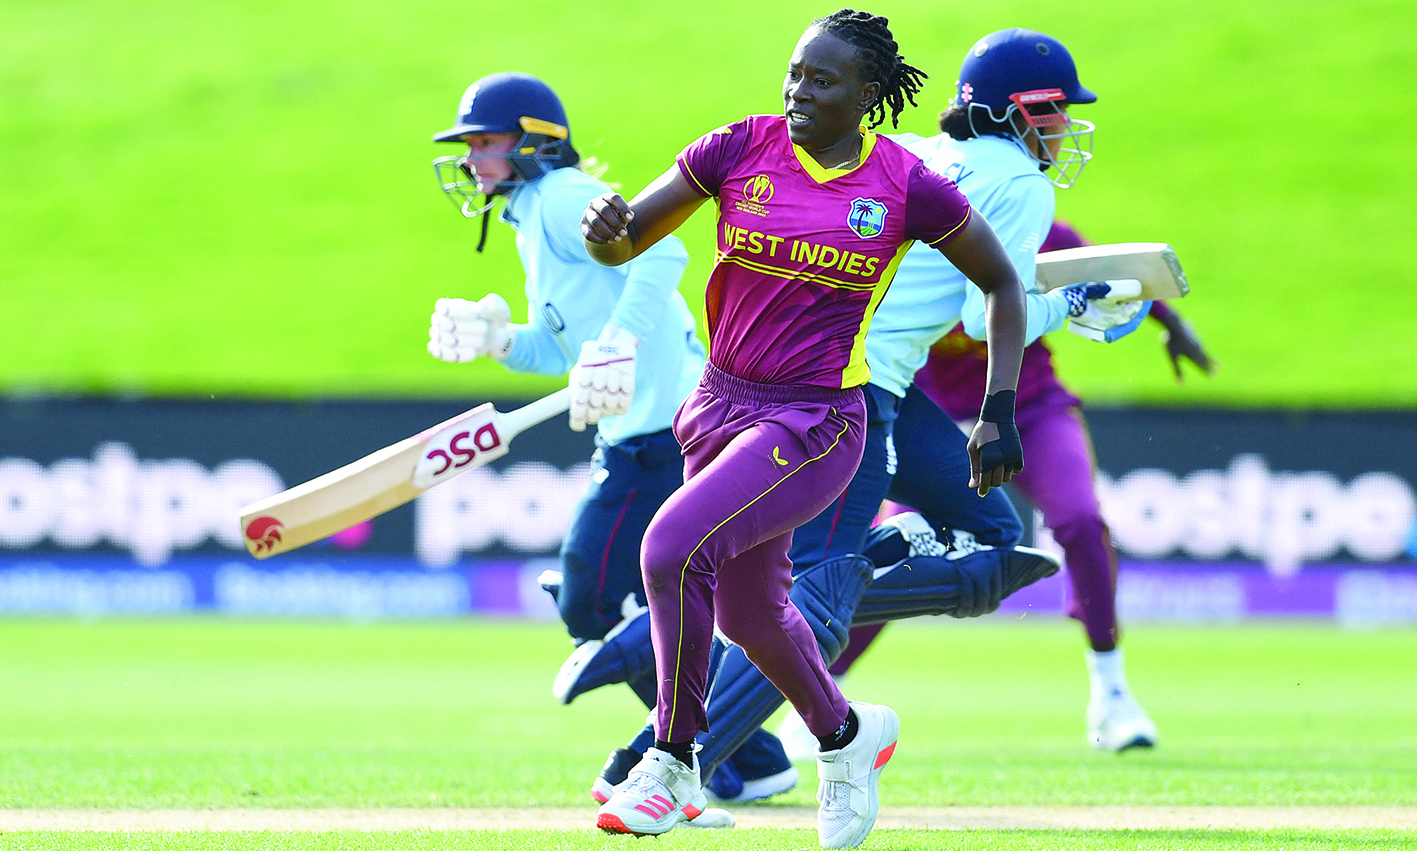 DUNEDIN: West Indies' Shakera Selman runs after the ball during the Round 2 Women's Cricket World Cup match between England and West Indies at University Oval yesterday. - AFP n